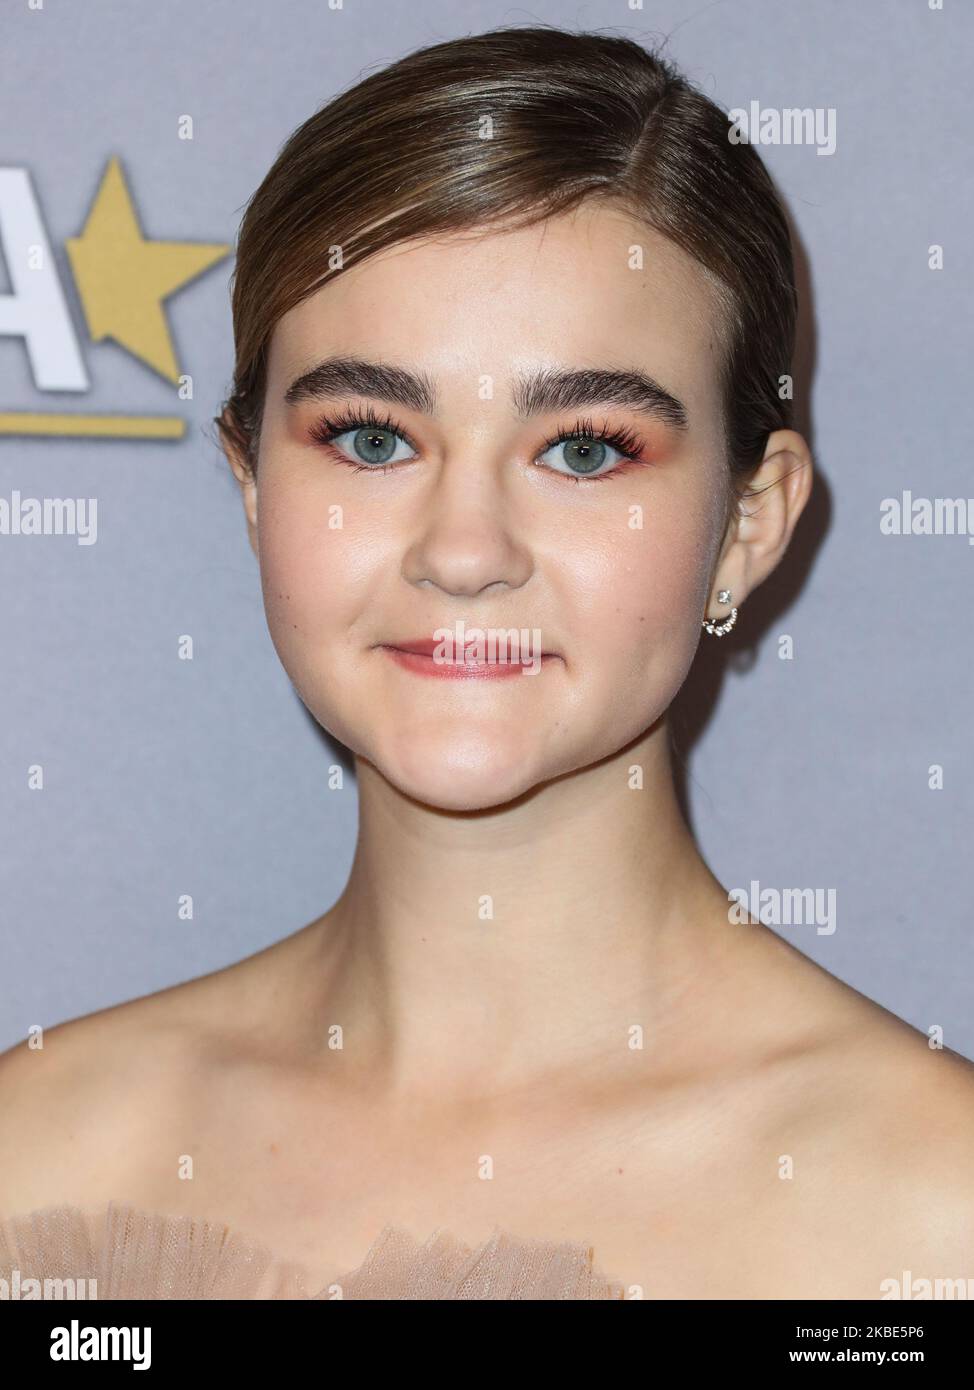 HOLLYWOOD, LOS ANGELES, CALIFORNIA, USA - JANUARY 09: Actress Millicent Simmonds arrives at the 3rd Annual Hollywood Critics' Awards held at the Taglyan Cultural Complex on January 9, 2020 in Hollywood, Los Angeles, California, United States. (Photo by Xavier Collin/Image Press Agency/NurPhoto) Stock Photo